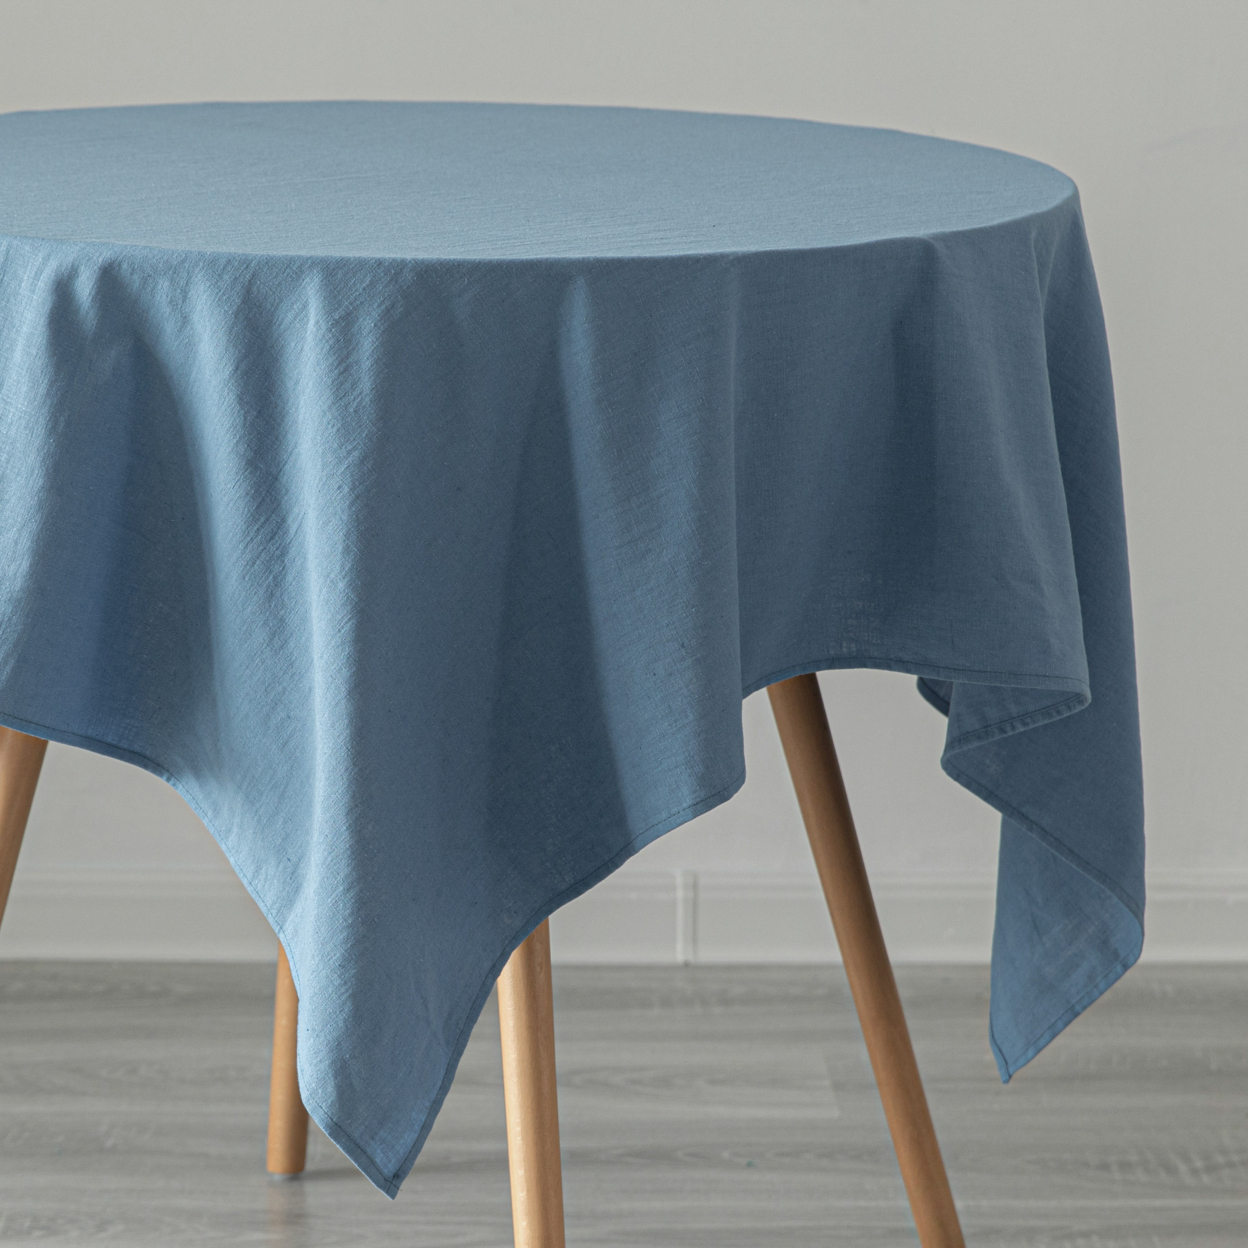 Deerlux 100 Percent Pure Linen Washable Tablecloth Solid Color - 52 X 70 In. Natural